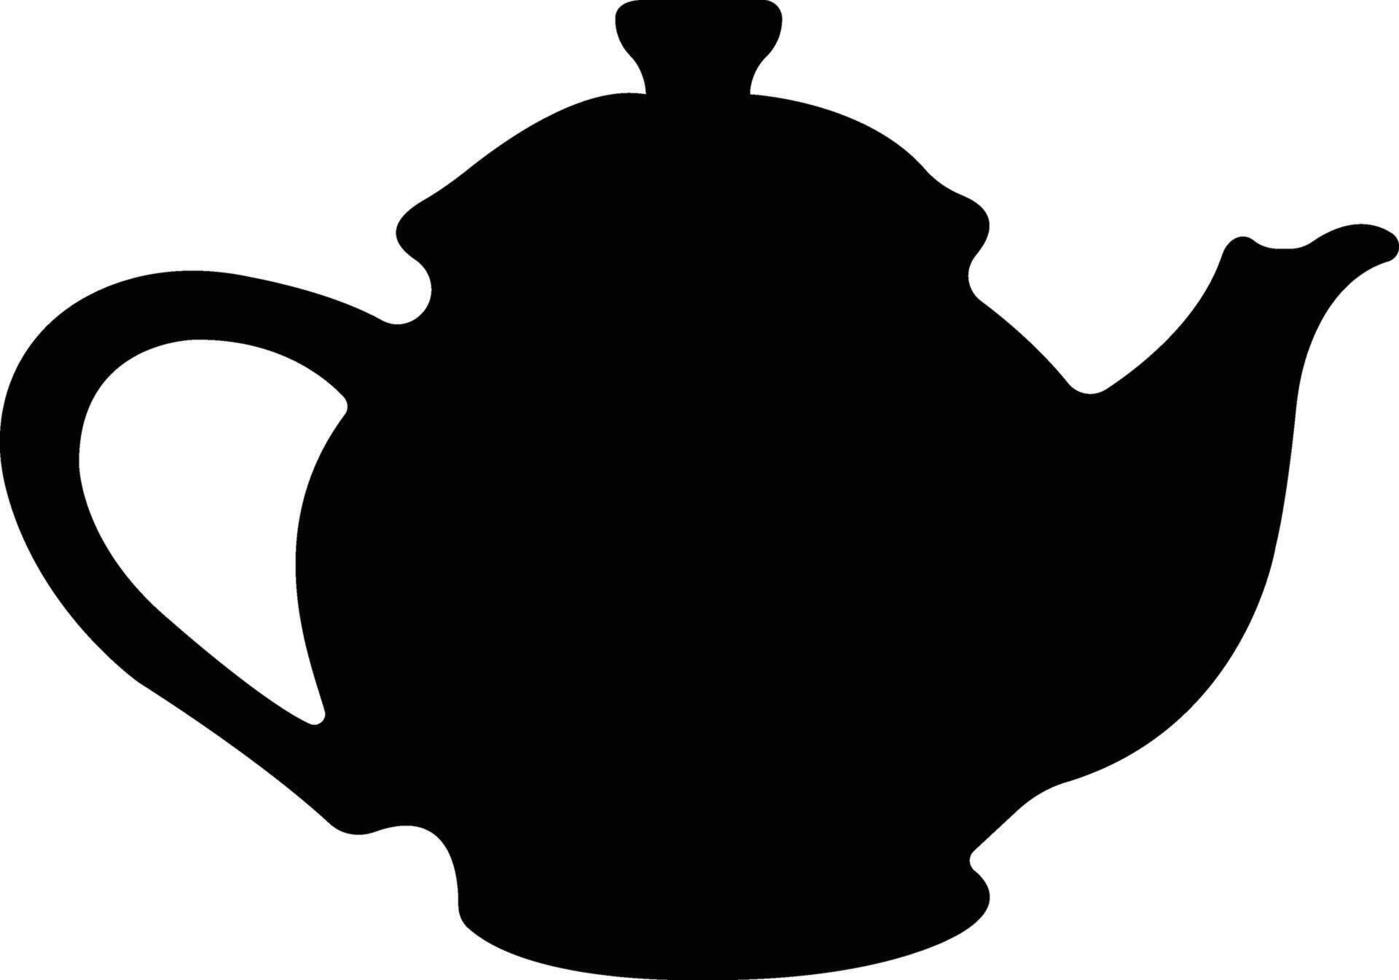 Tea pot icon in flat style. isolated on Tea kettle or teapot sign and symbol. teapots, drinking coffee pot. Abstract design Logotype art vector for apps website